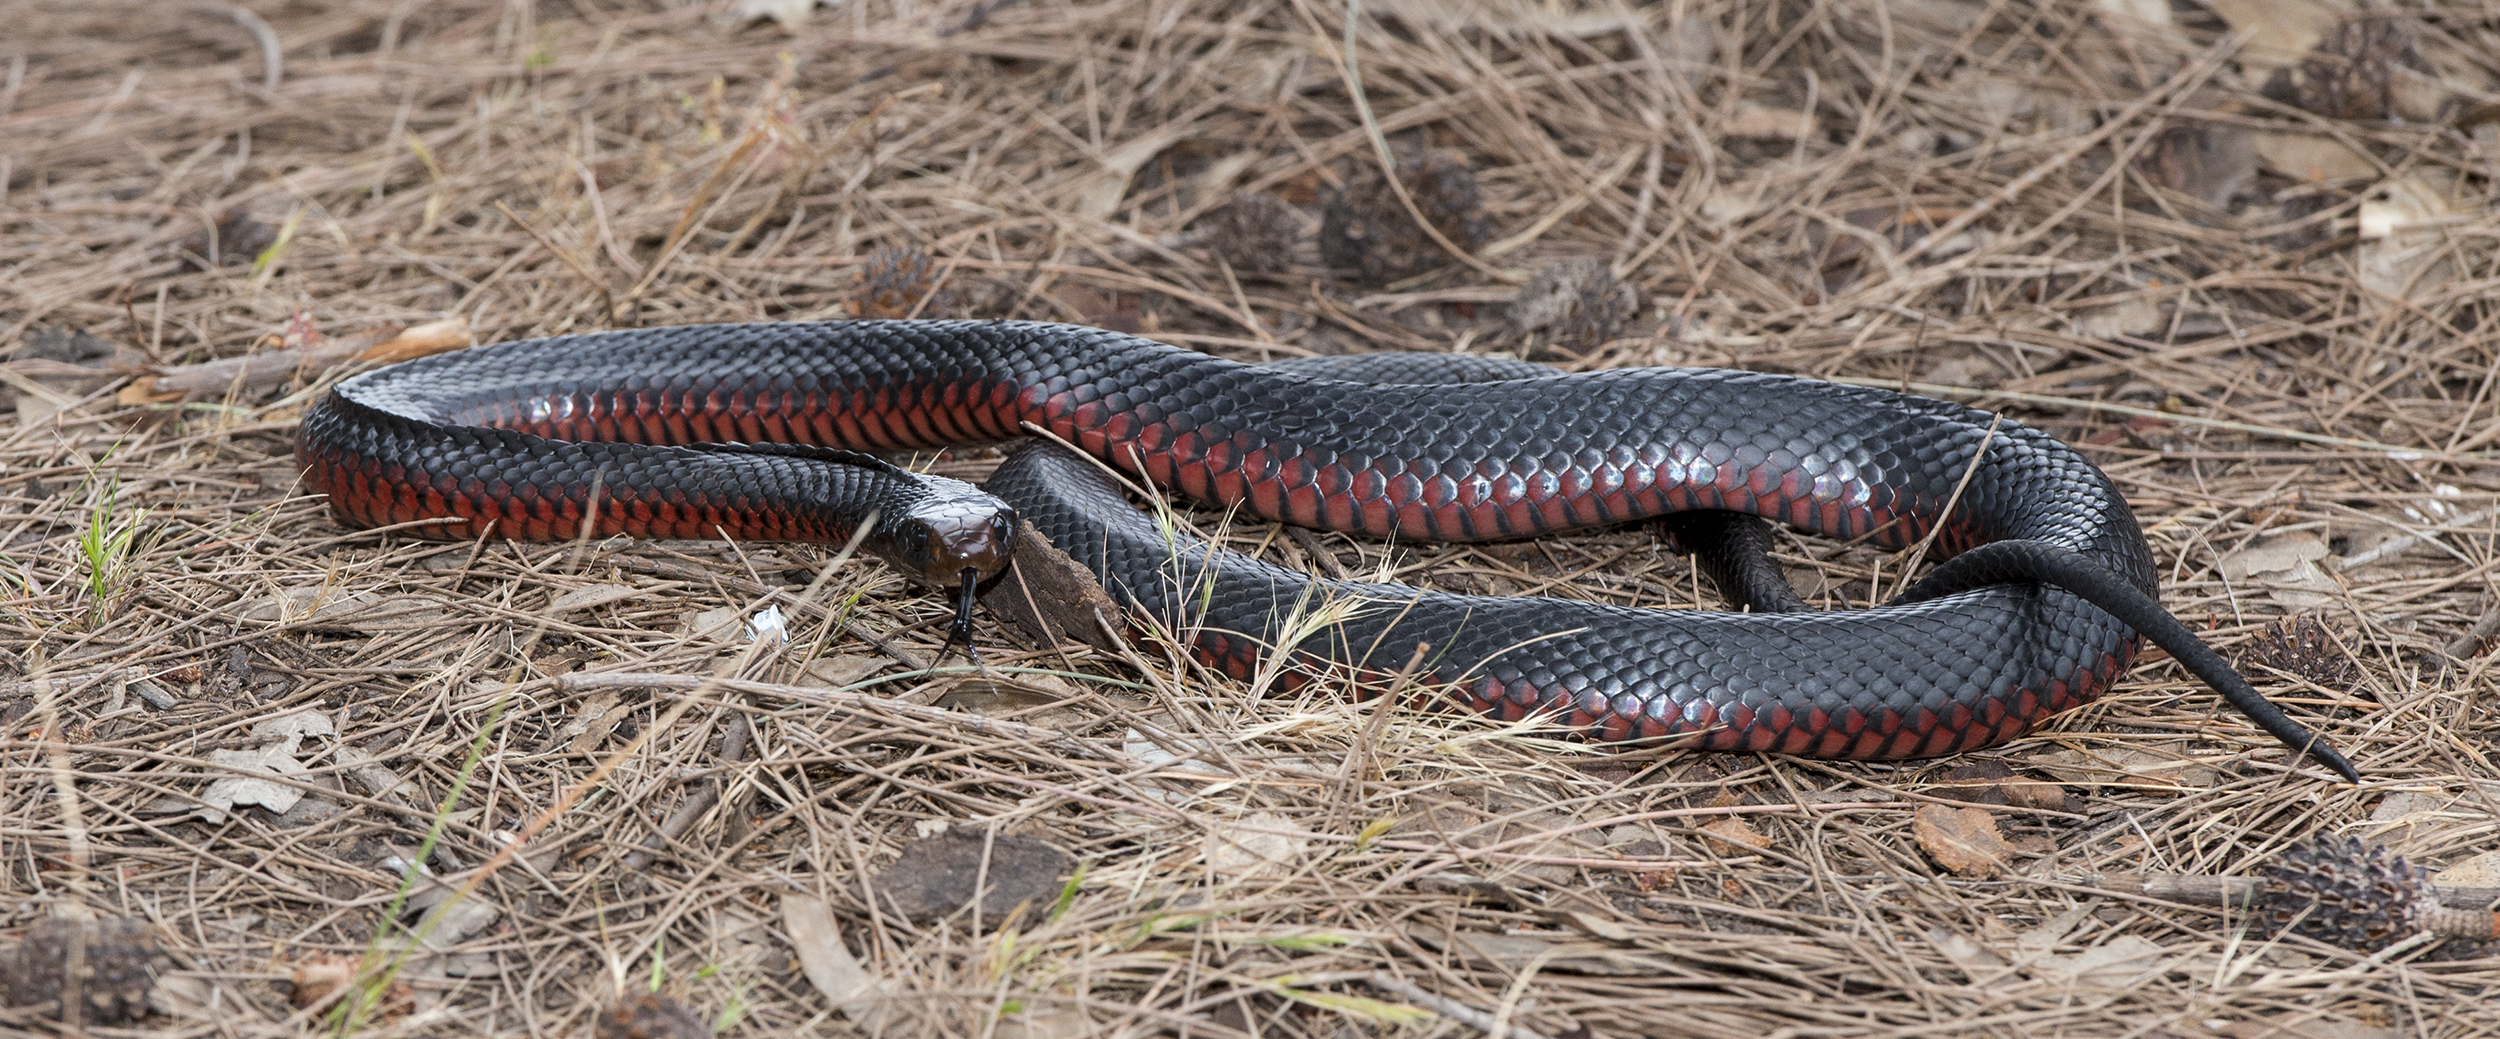 Eight myths about snakes - Museums Victoria